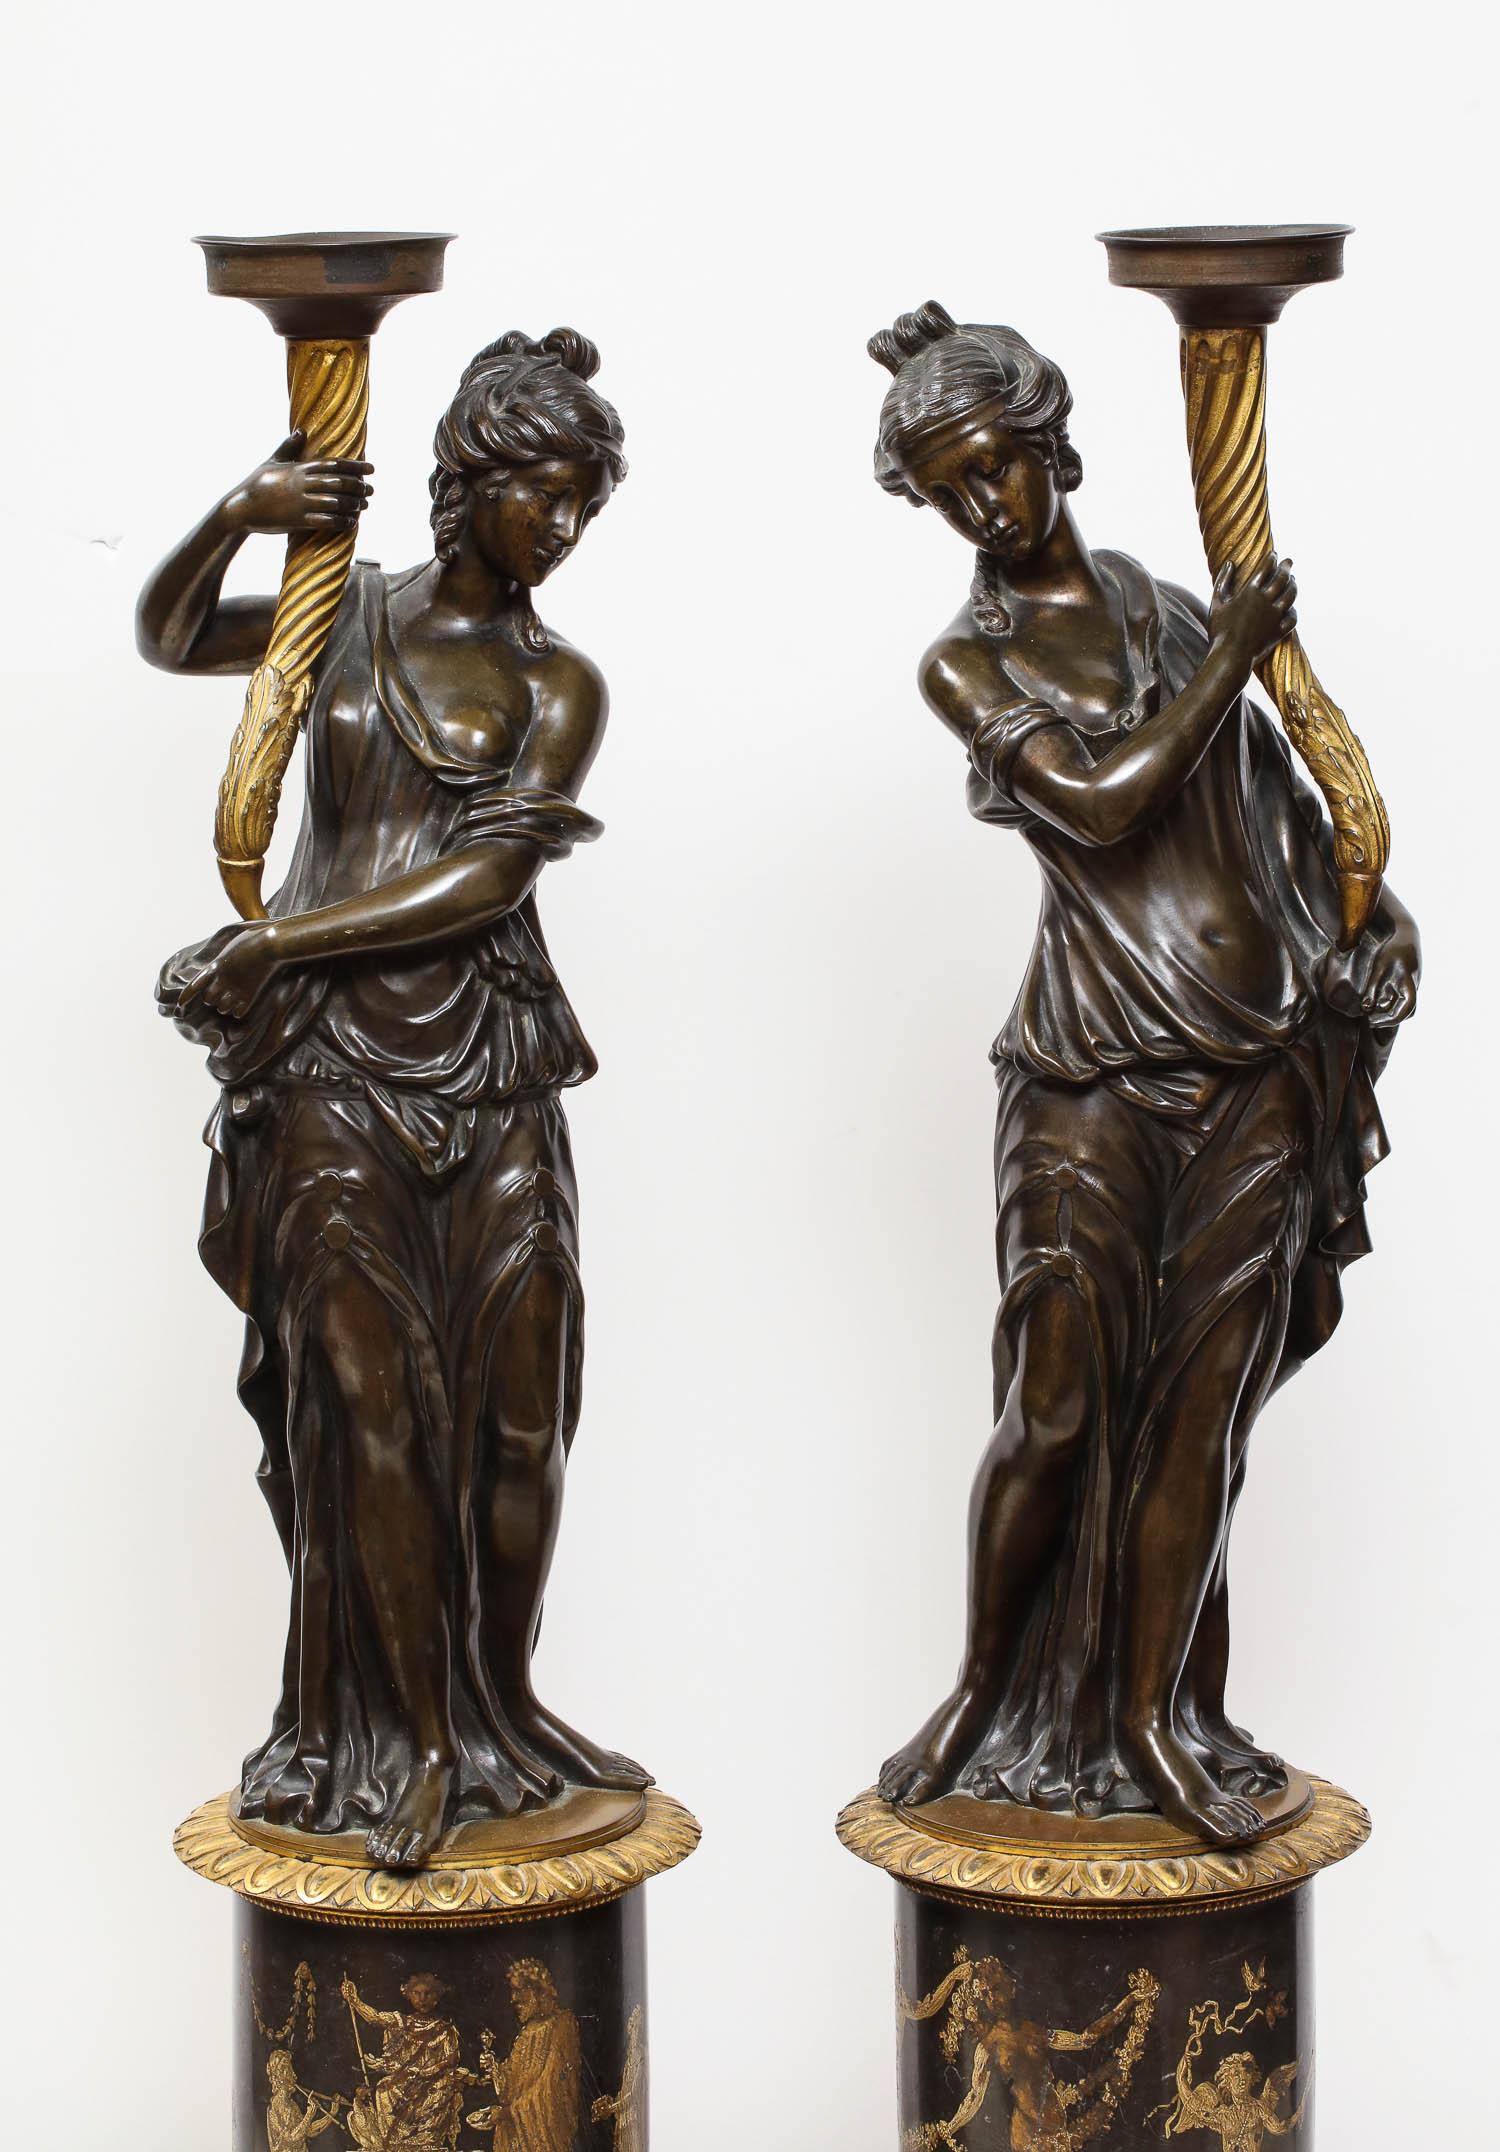 Regency Large Pair of French Gilt and Patinated Bronze Figural Candleholders